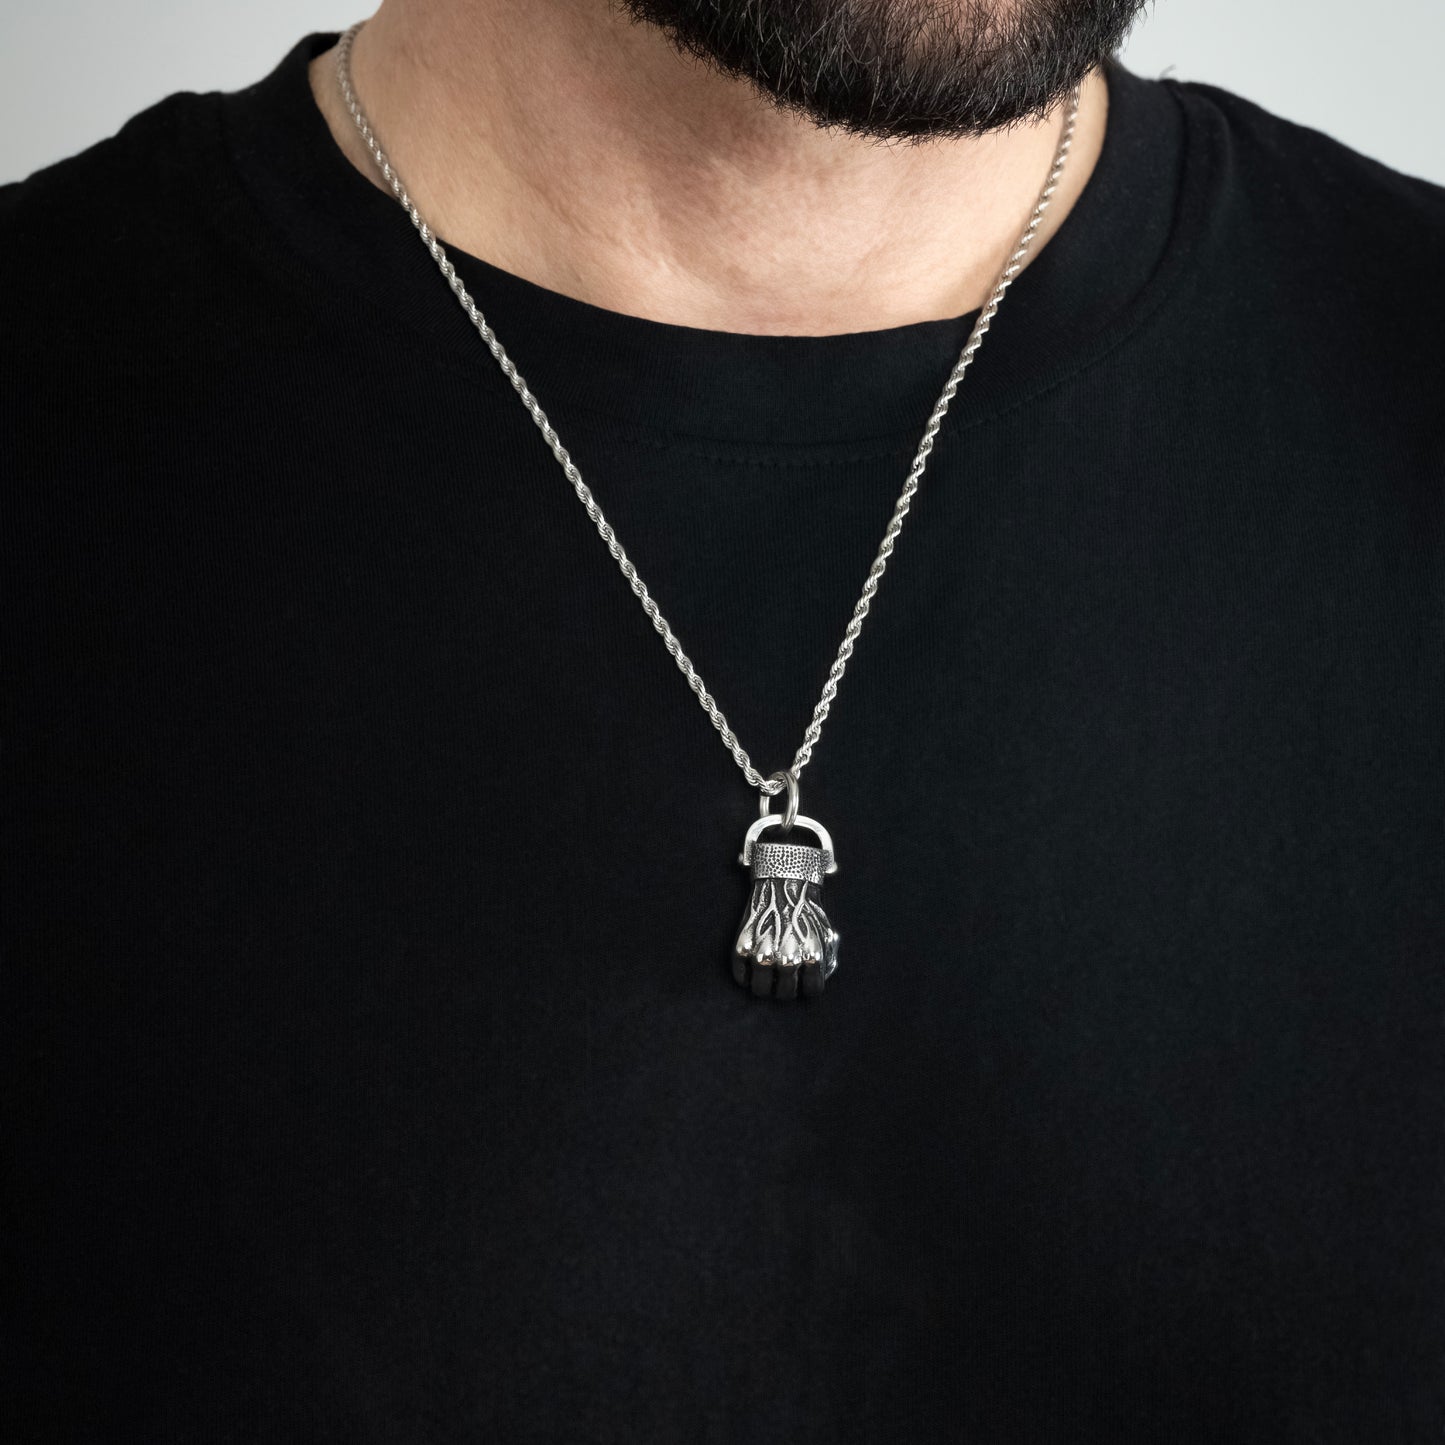 A male model in a black t-shirt wearing a Fist Silver Pendant with a Silver Rope chain 22 inches. Close-up image of the non-tarnish, waterproof trending clenched fist necklace.